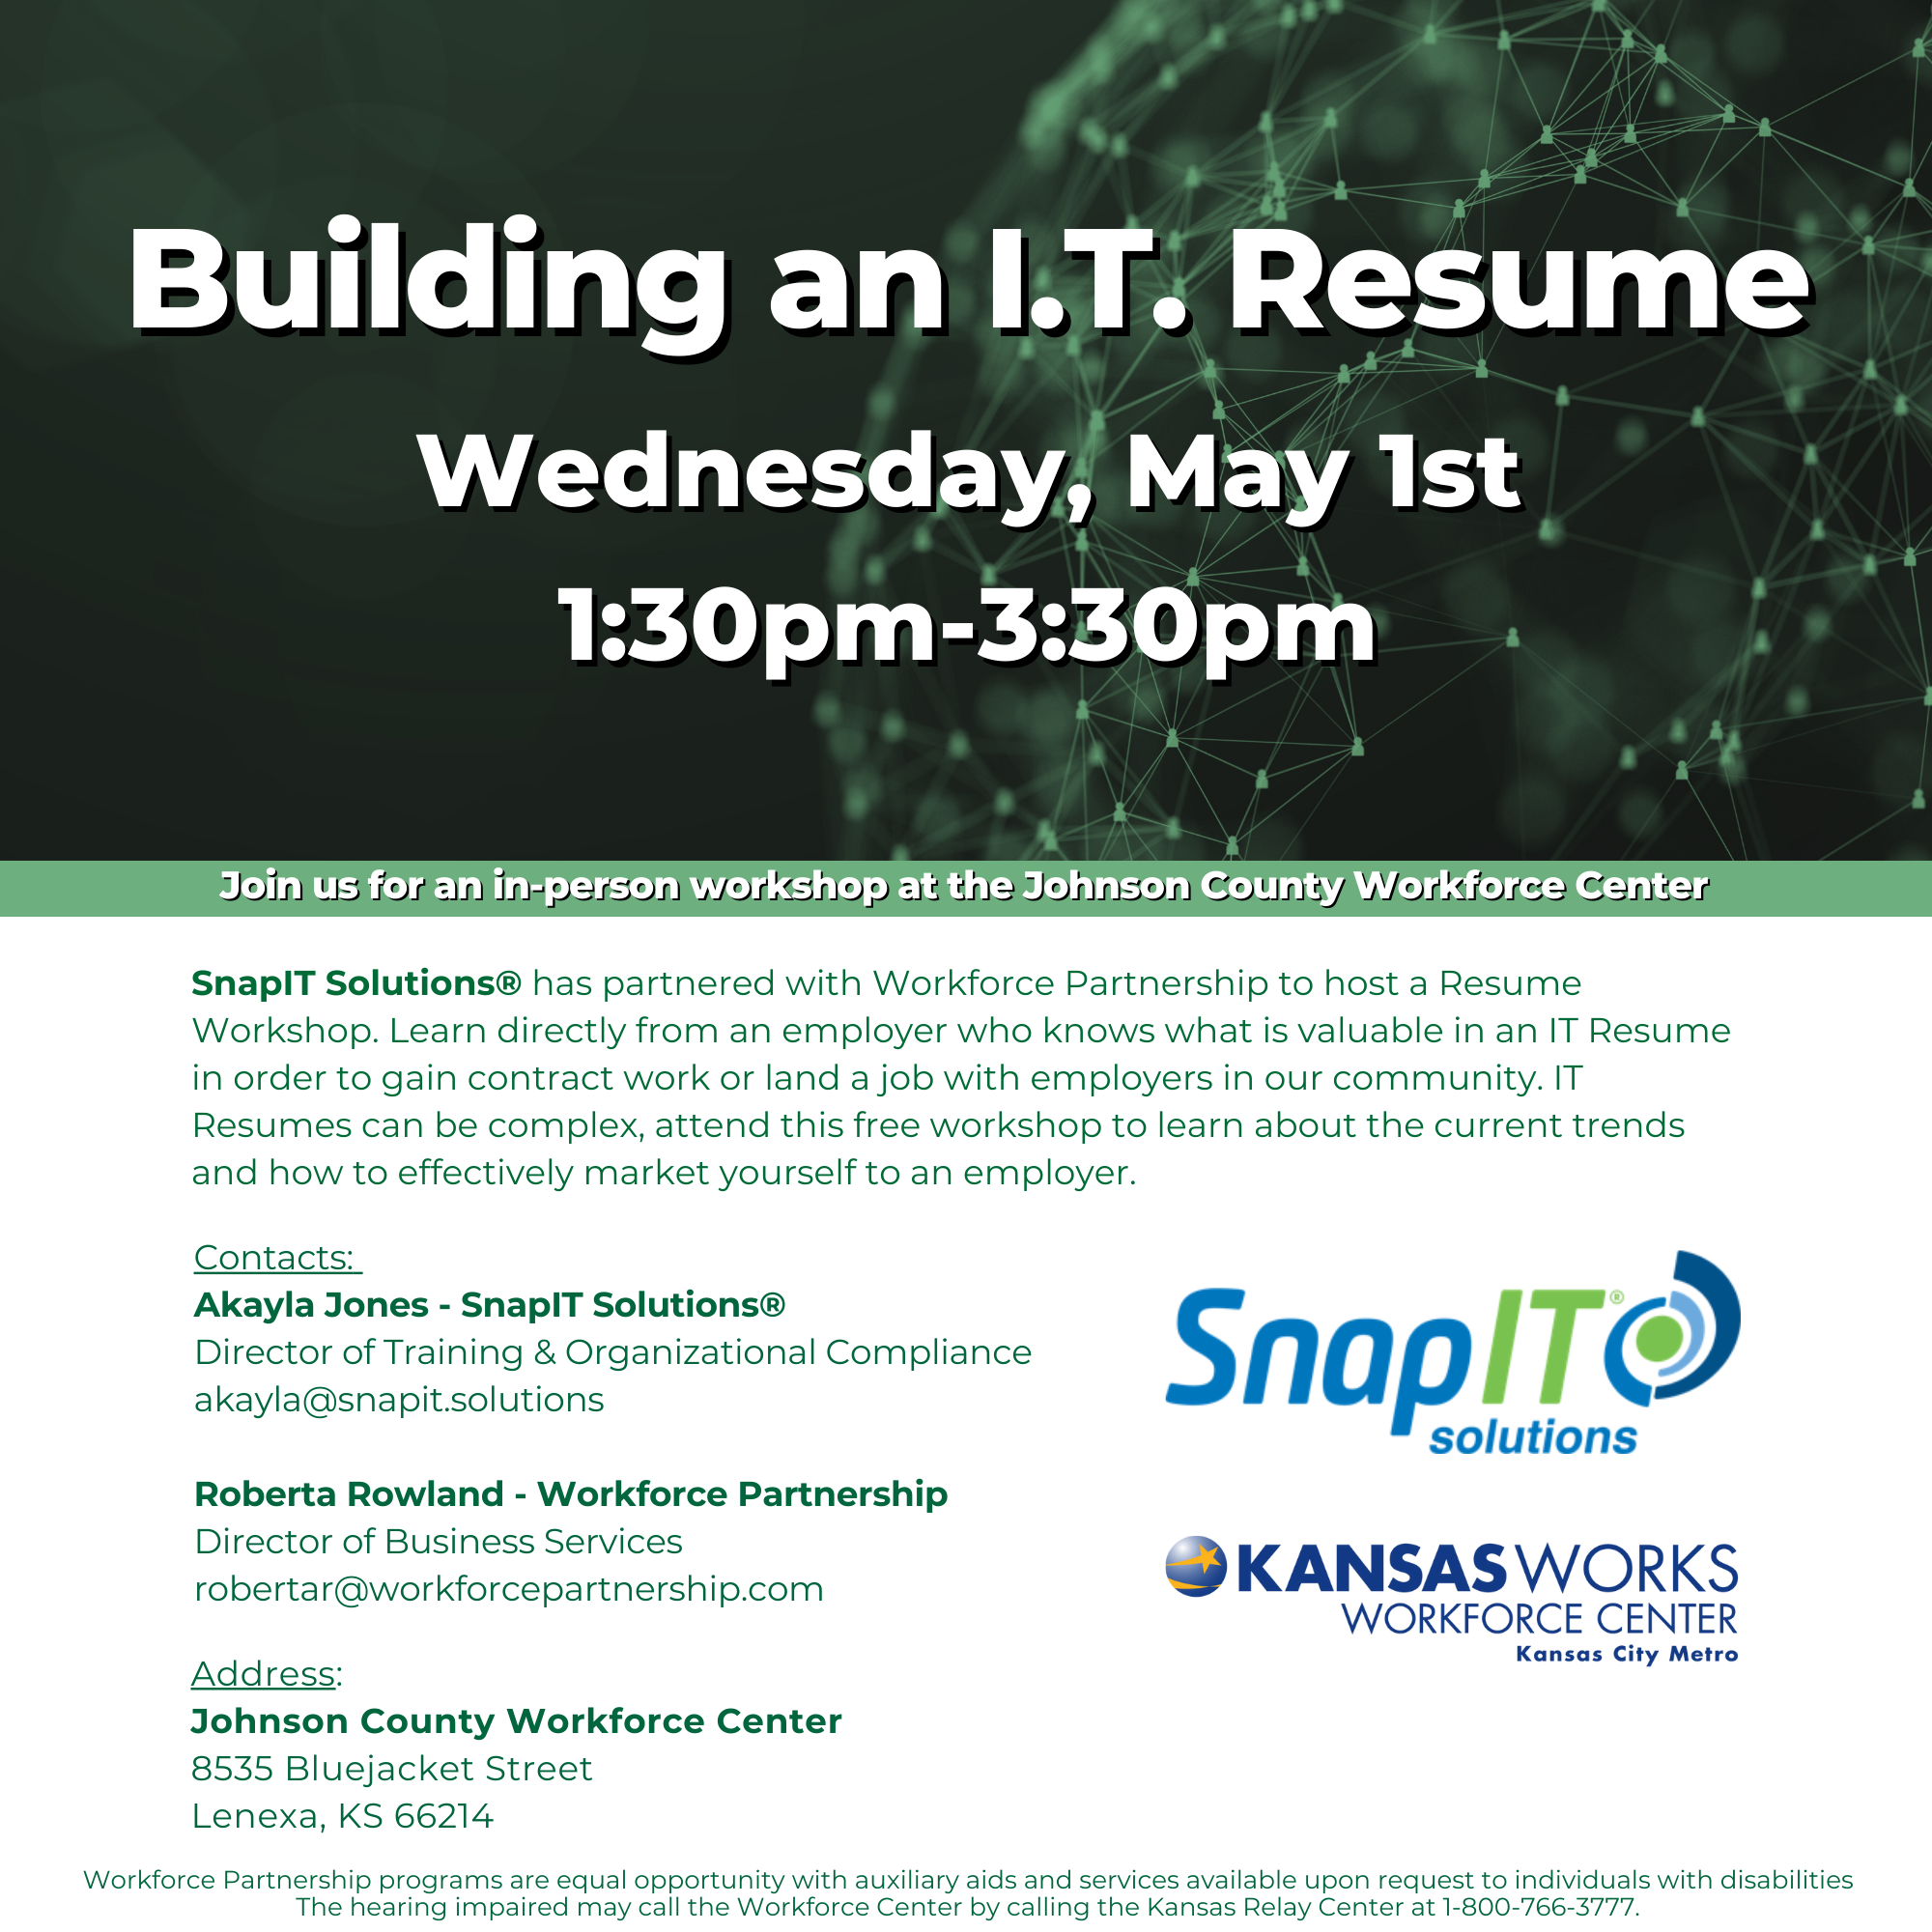 SnapIT Resume Workshop on Wednesday, May 1st!